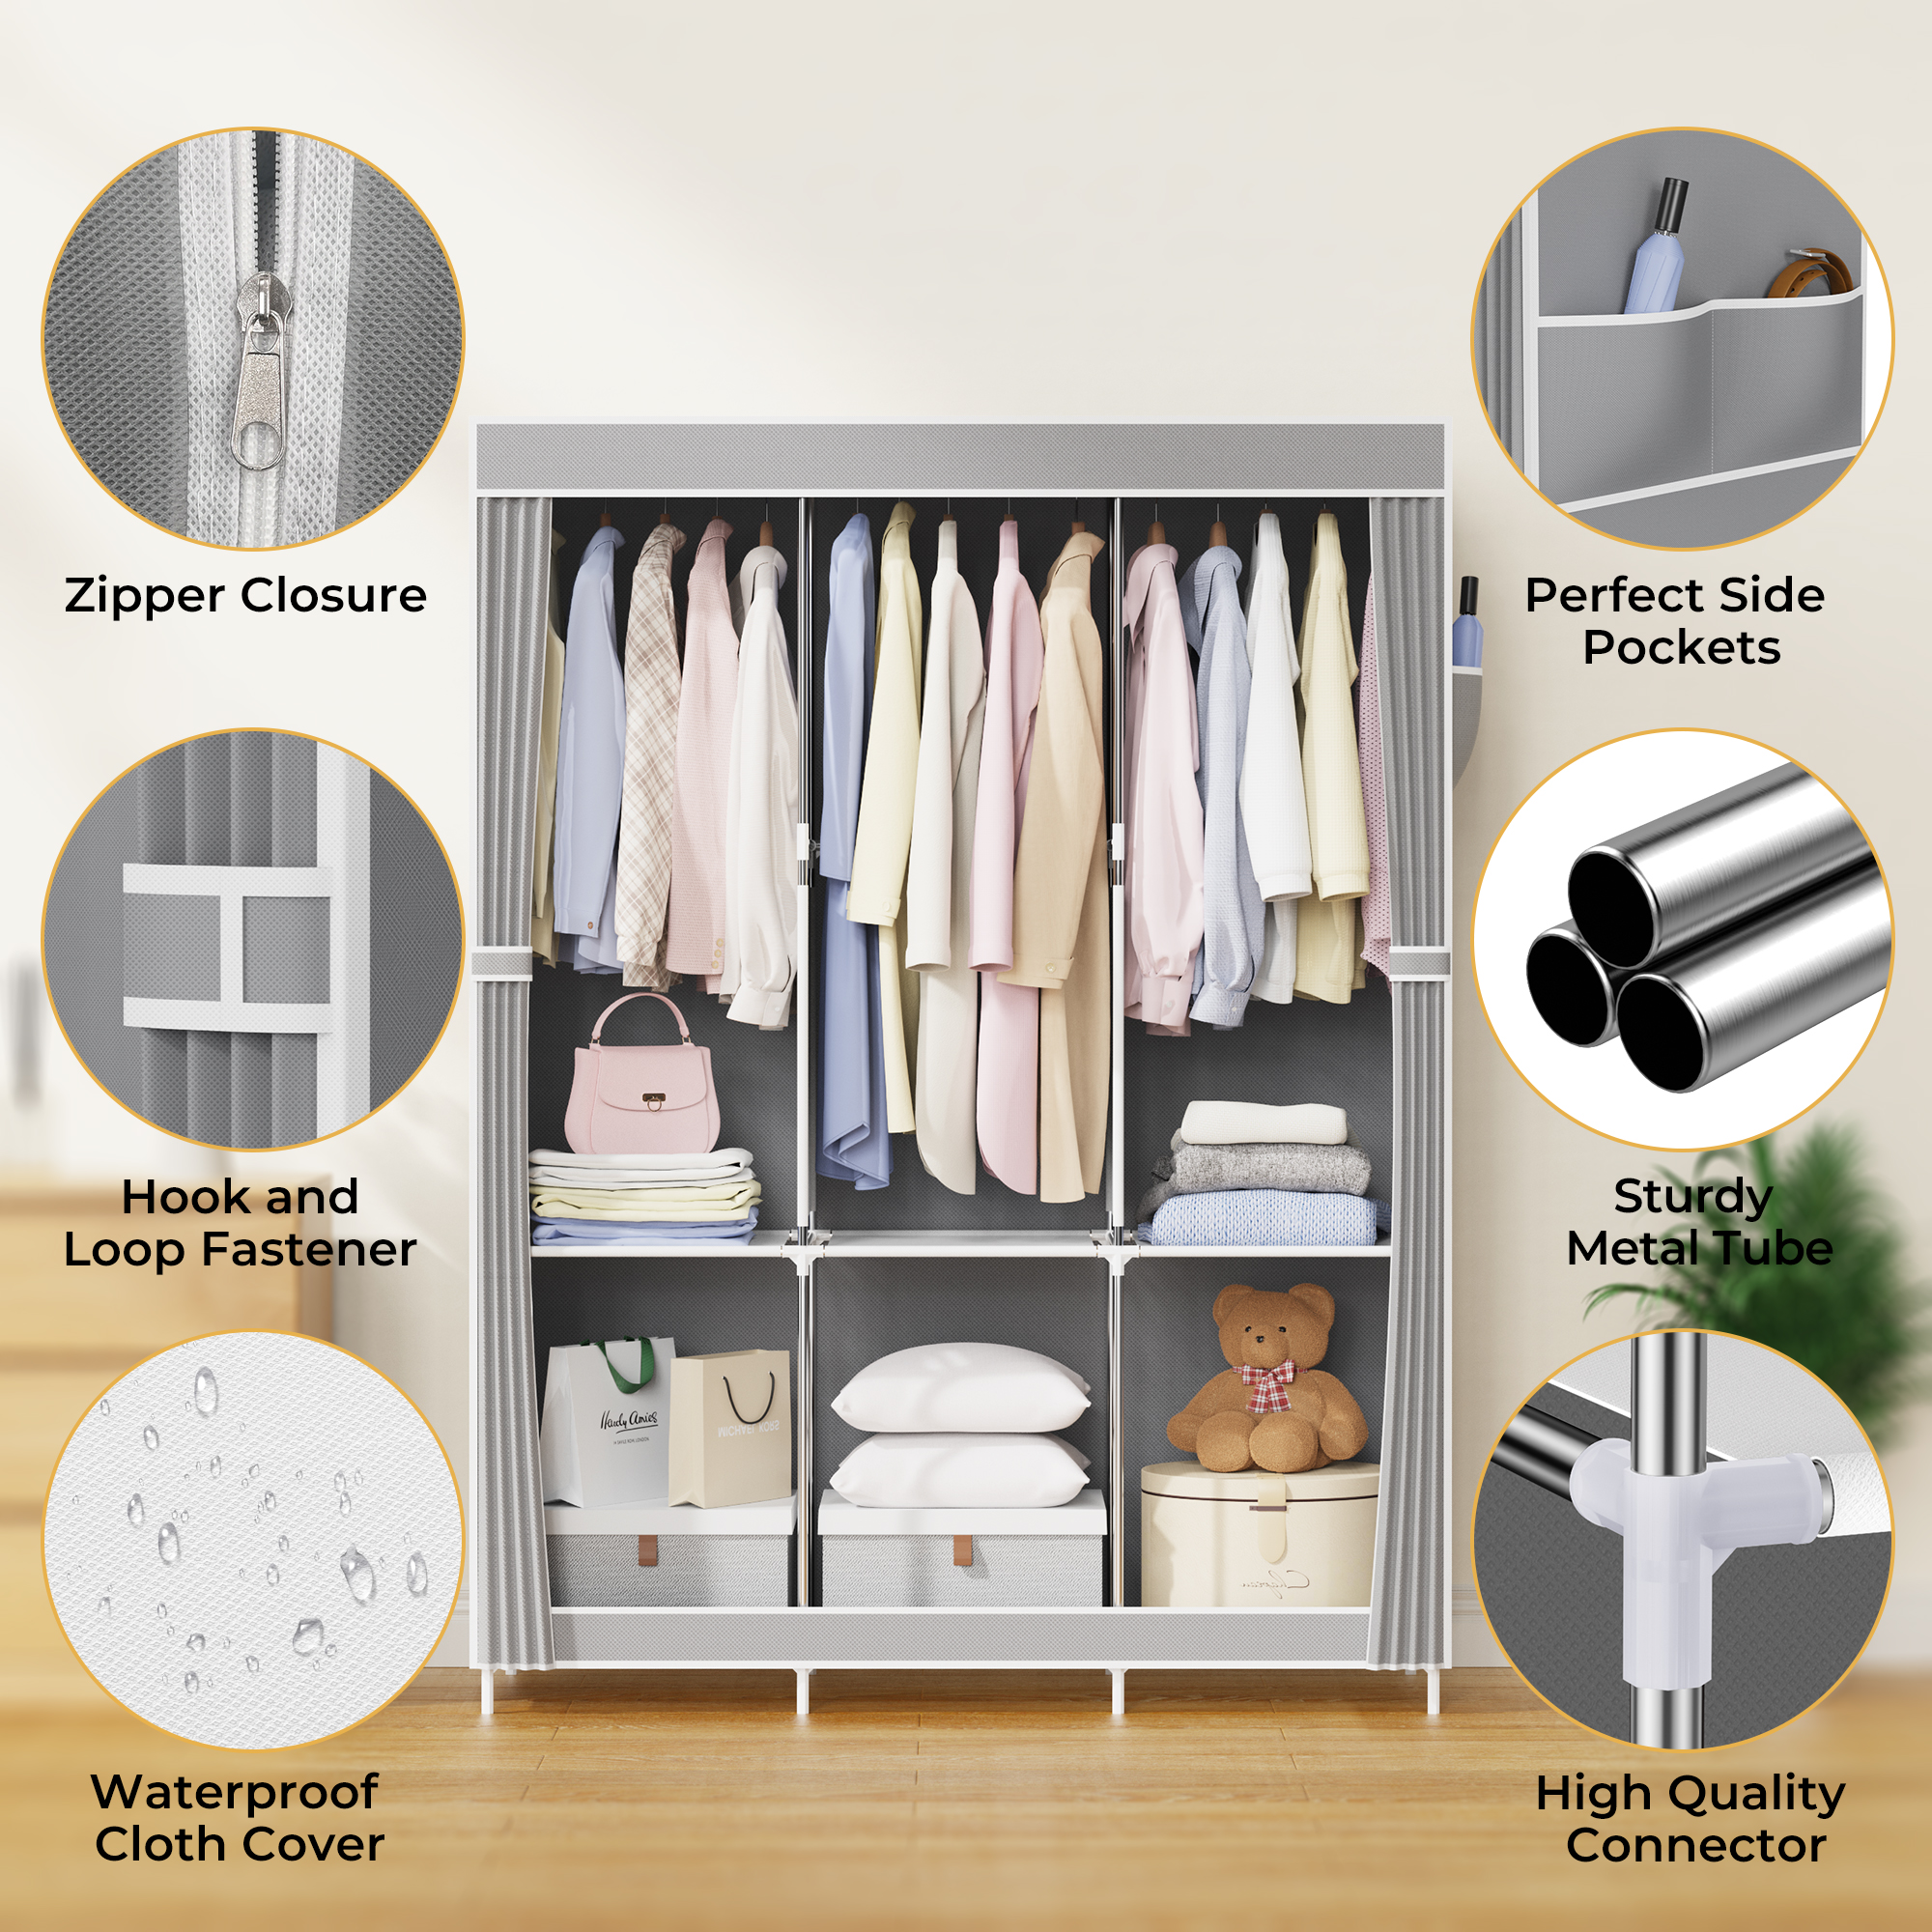 Riousery Portable Closet Wardrobe for Hanging Clothes  6 Storage Organizer Shelves Closet for Bedroom Free Standing Clothes Rack with Cover, Grey - image 2 of 7